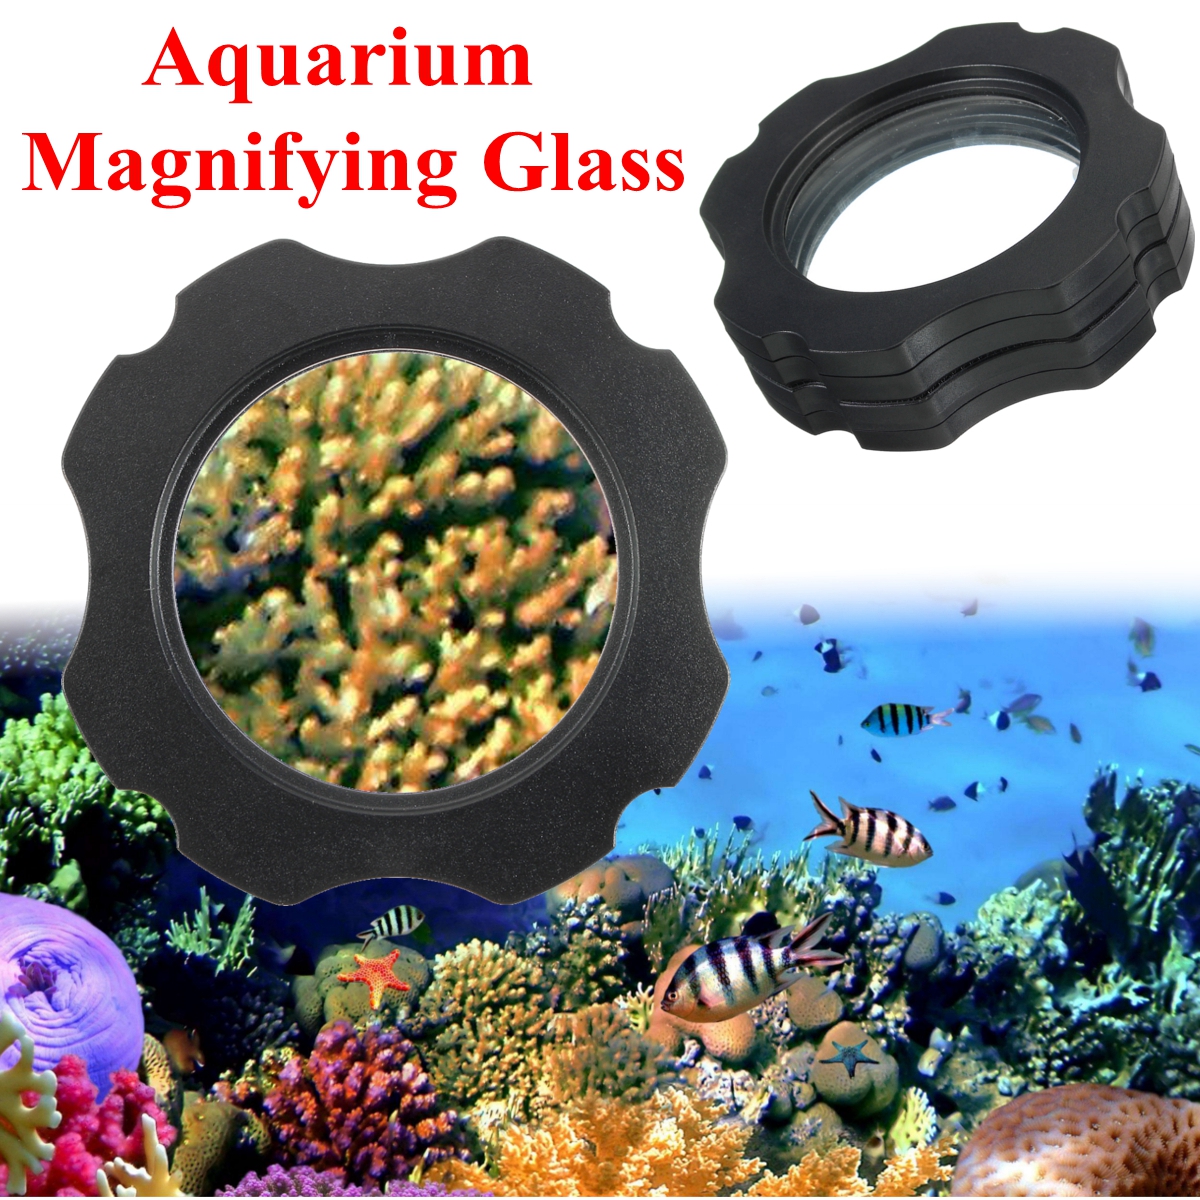 2 in 1 Aquarium Magnifier Magnetic Viewer Fish Tank Magnifying Glass Aquarium Glass Cleaner Ideal for Photography Viewing Coral